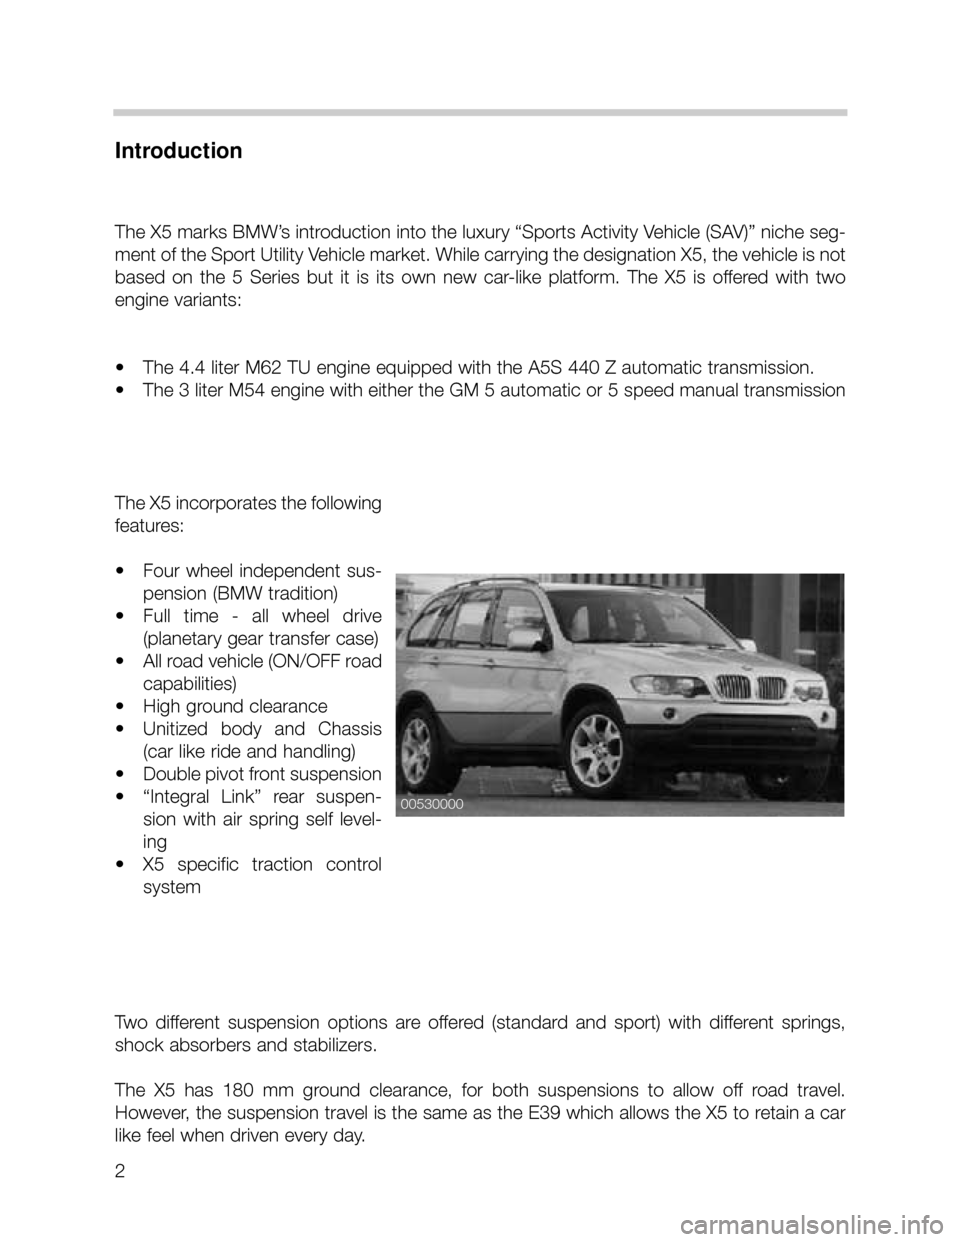 BMW X5 2003 E53 Workshop Manual 2
Introduction
The X5 marks BMW’s introduction into the luxury “Sports Activity Vehicle (SAV)” niche seg-
ment of the Sport Utility Vehicle market. While carrying the designation X5, the vehicle